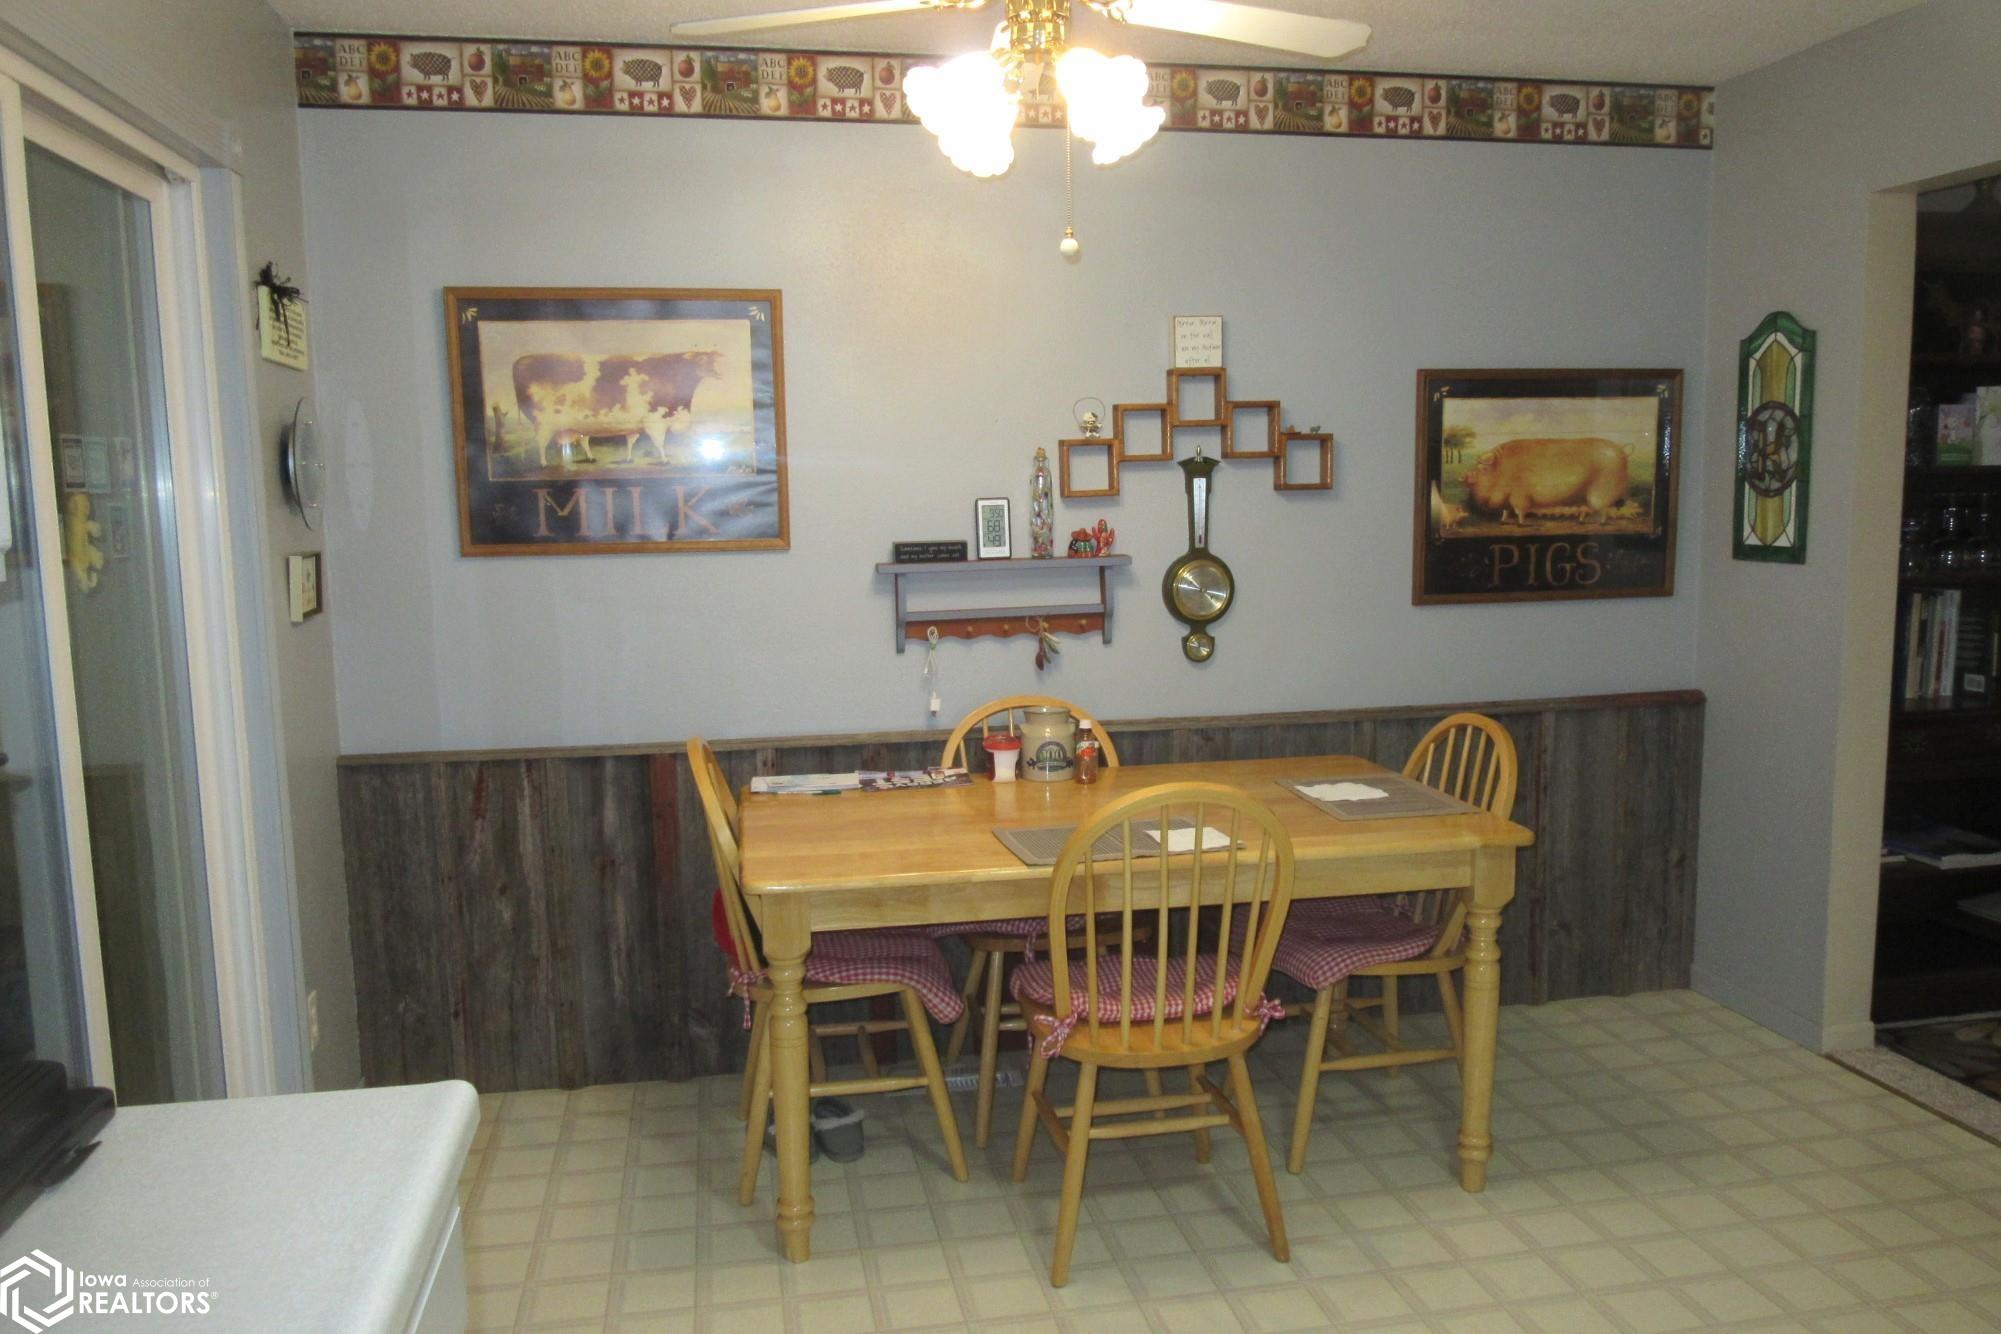 Open to Kitchen and also dble opening to Living Room.   Barn Siding in Dining Room for personality!